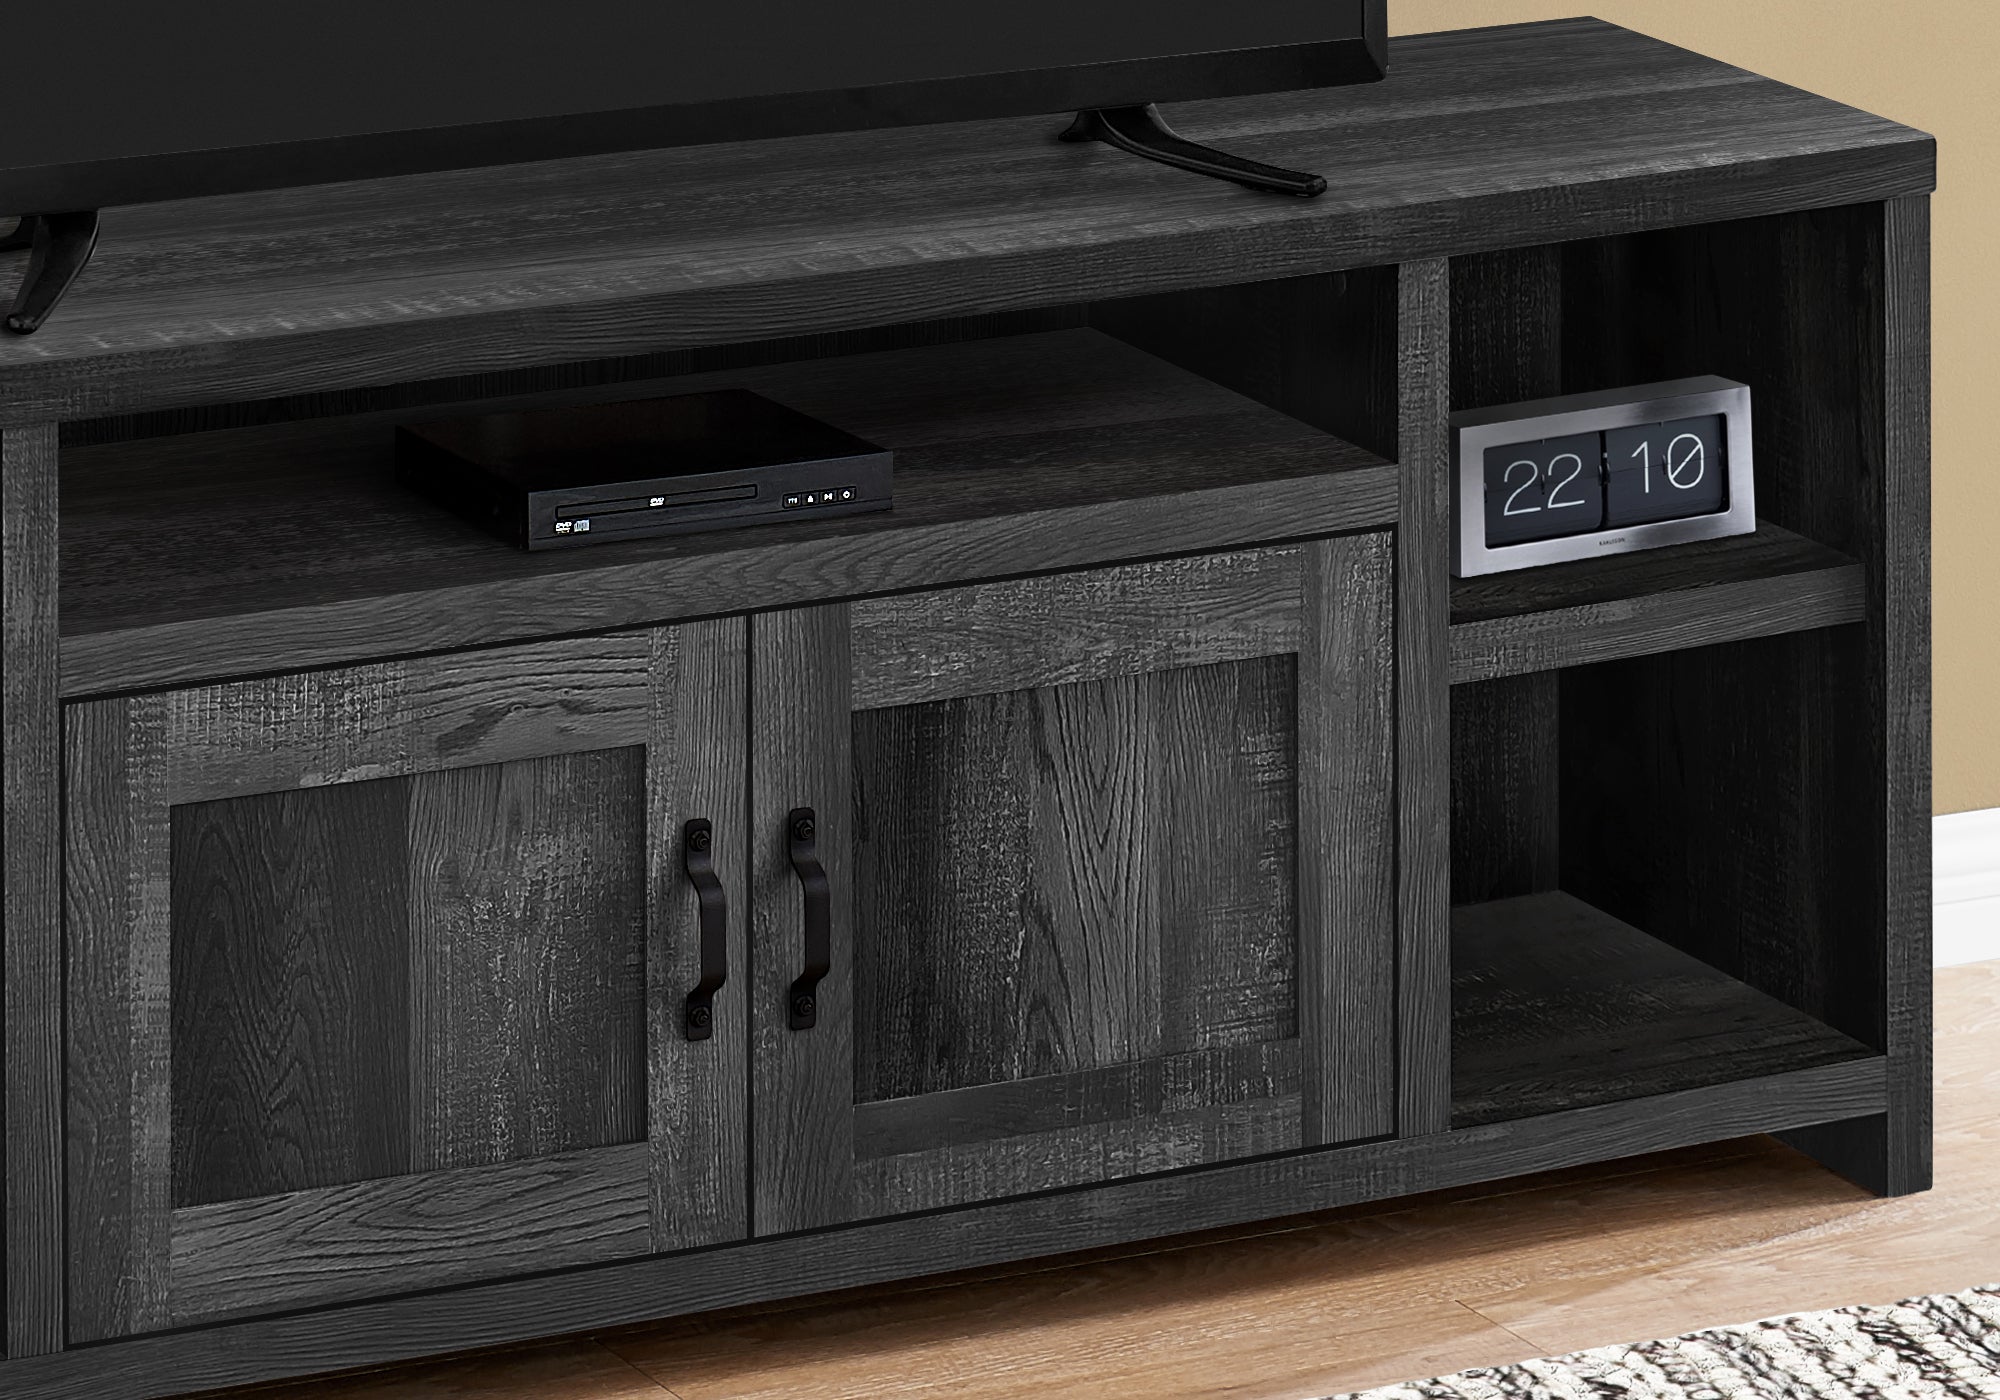 I 2743 - TV STAND - 60"L / BLACK RECLAIMED WOOD-LOOK BY MONARCH SPECIALTIES INC